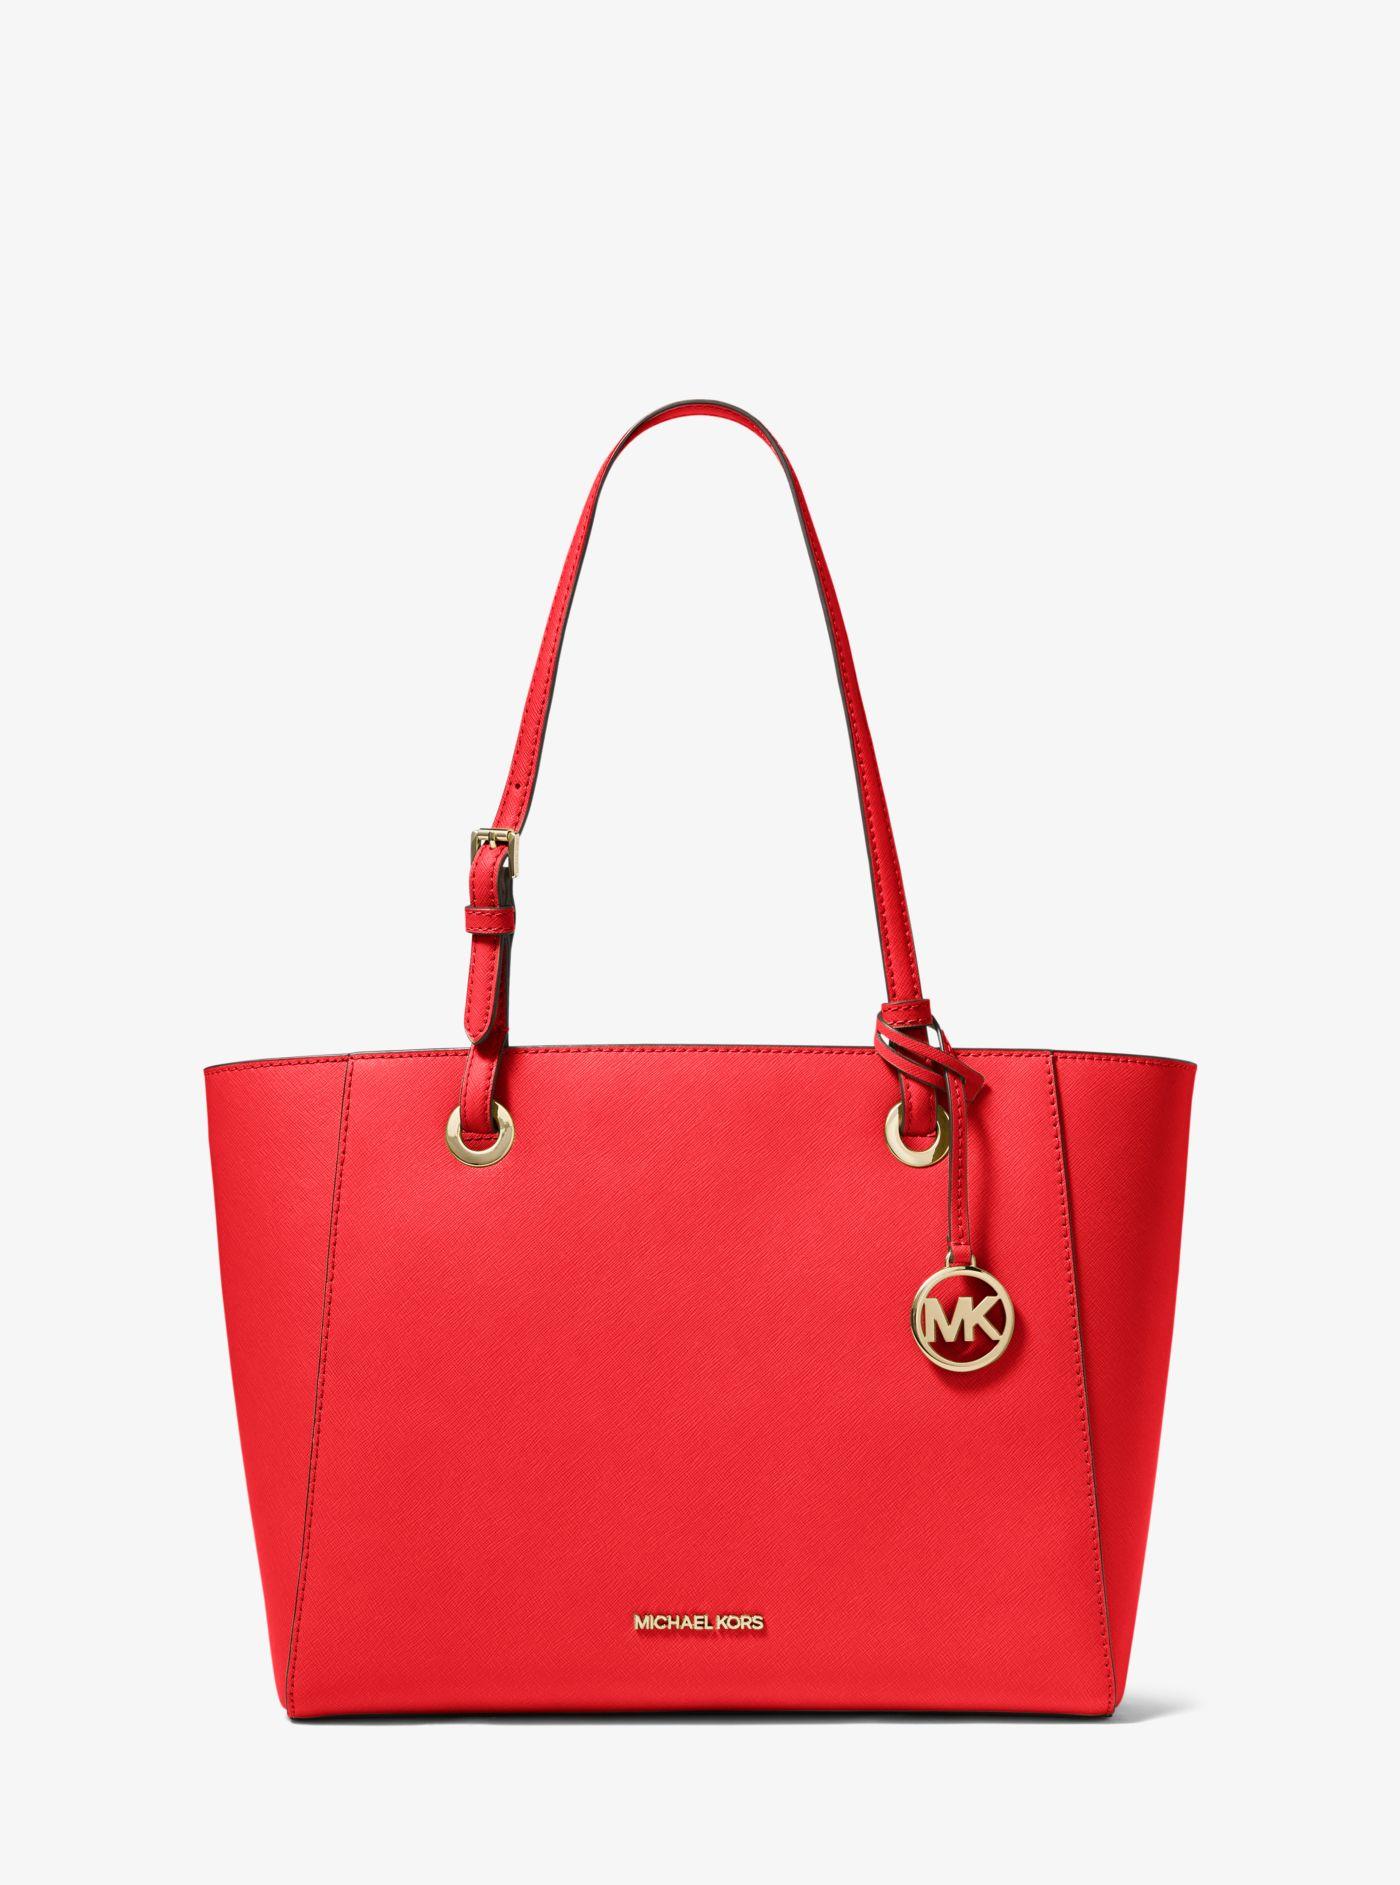 Michael Kors Walsh Medium Saffiano Leather Tote Bag in Red - Lyst